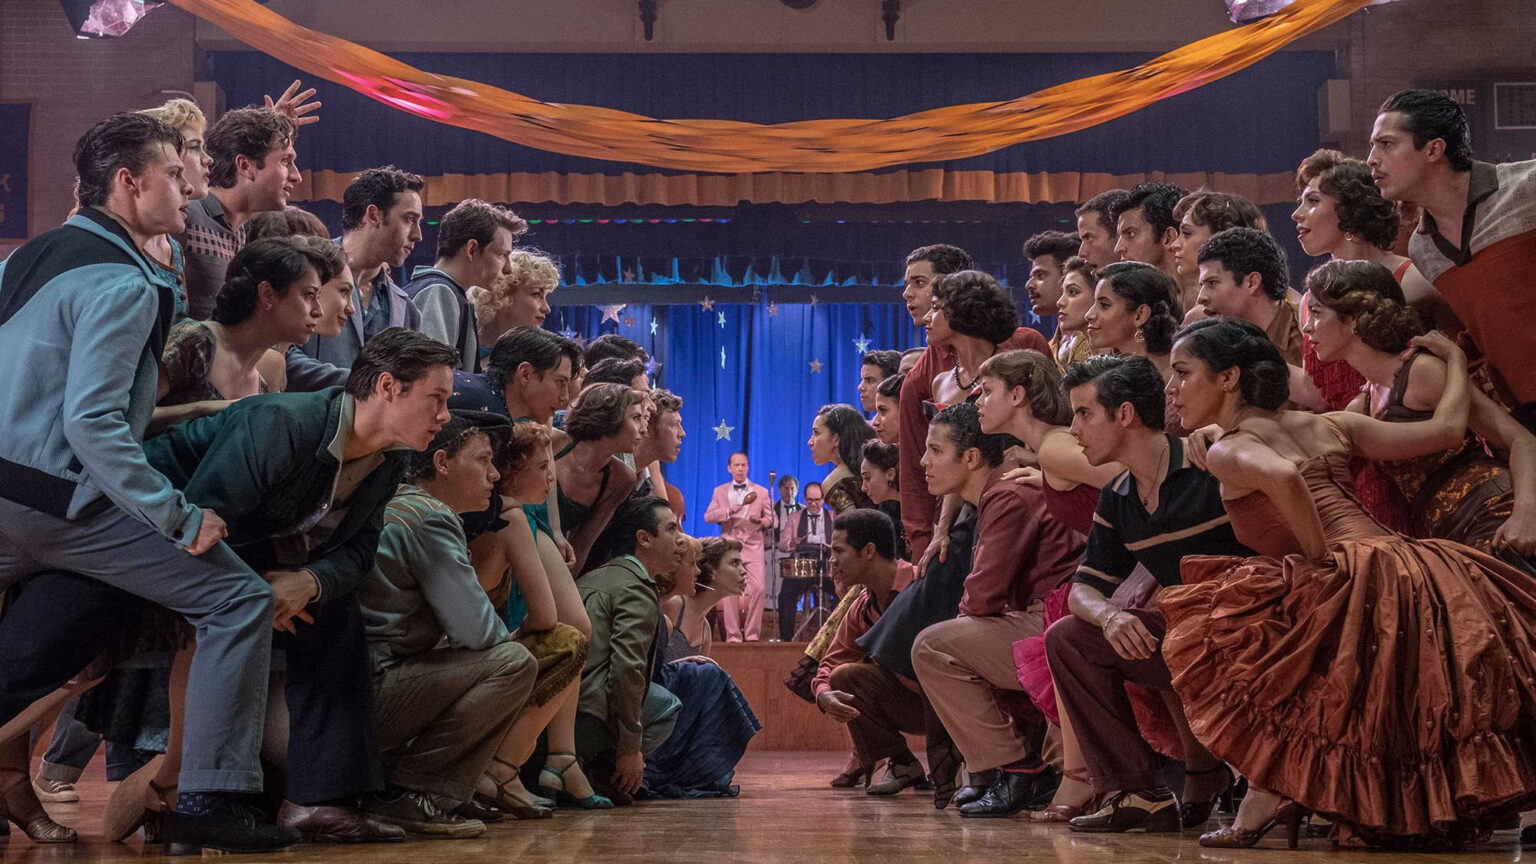 We have to admit, the cast of 'West Side Story' looks mostly solid, but will that save Spielberg's latest movie from being the next 'Cats'? Here's our take.